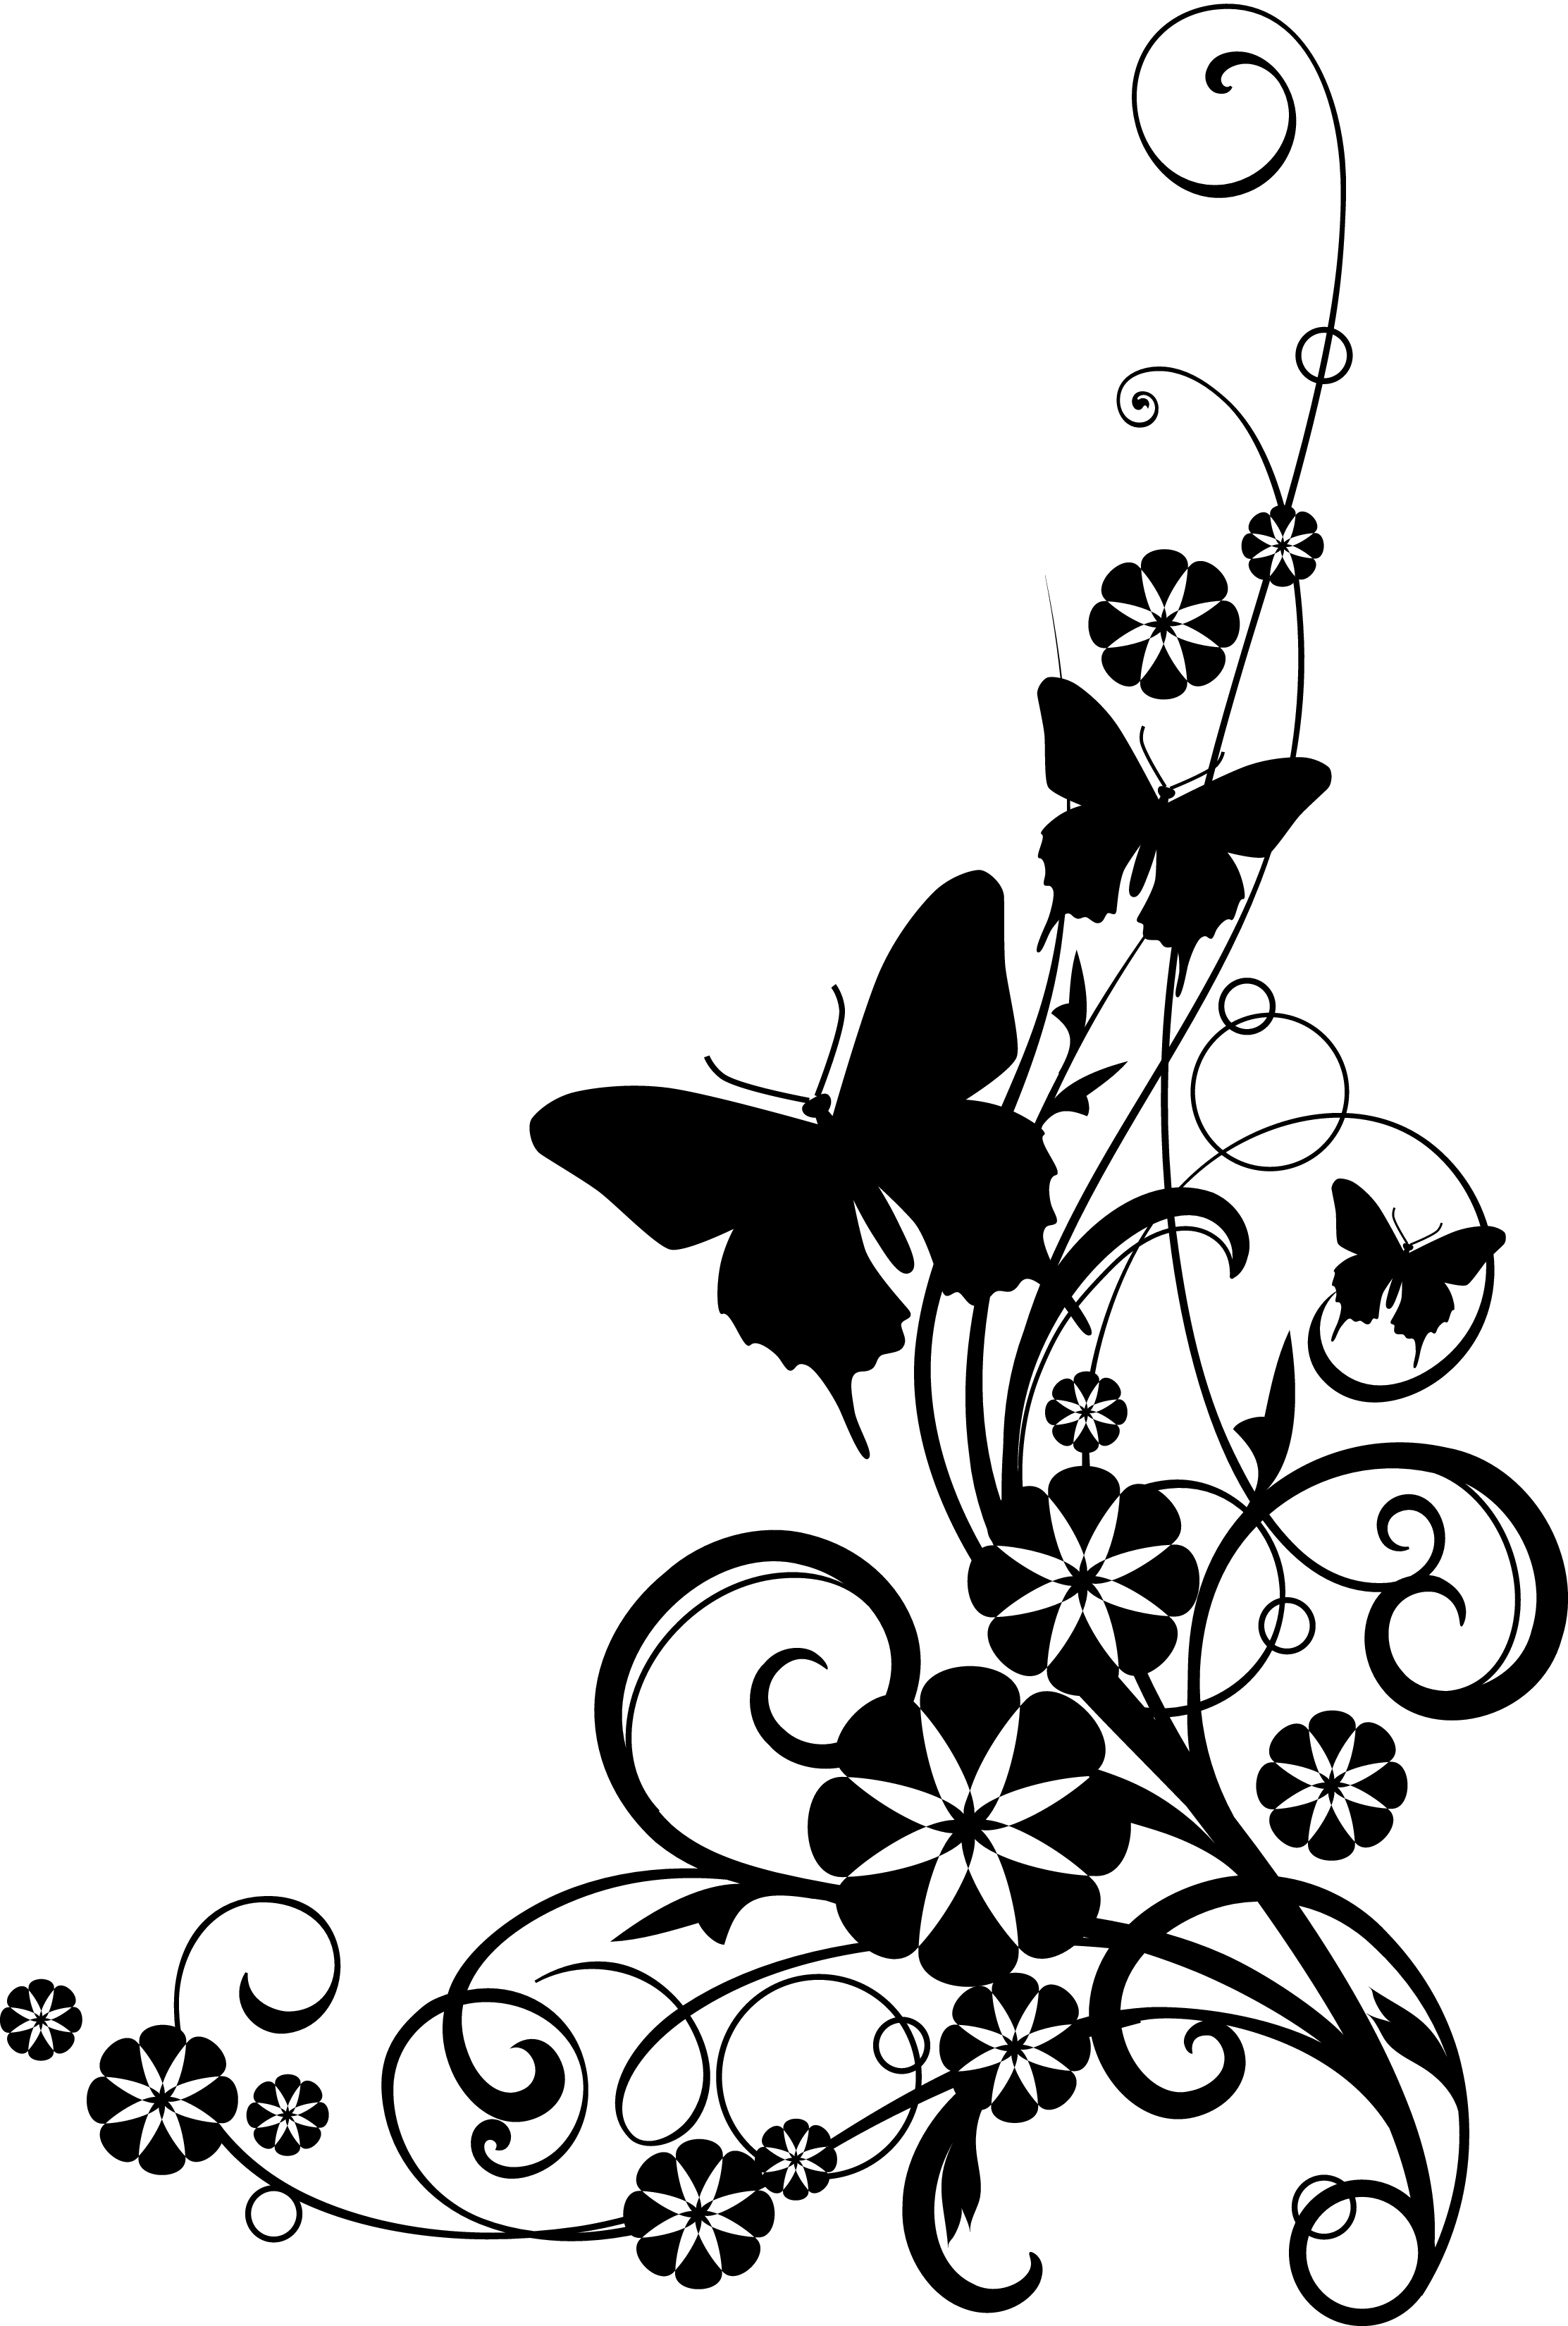 Flower Border Clipart Black And White | Clipart library - Free 